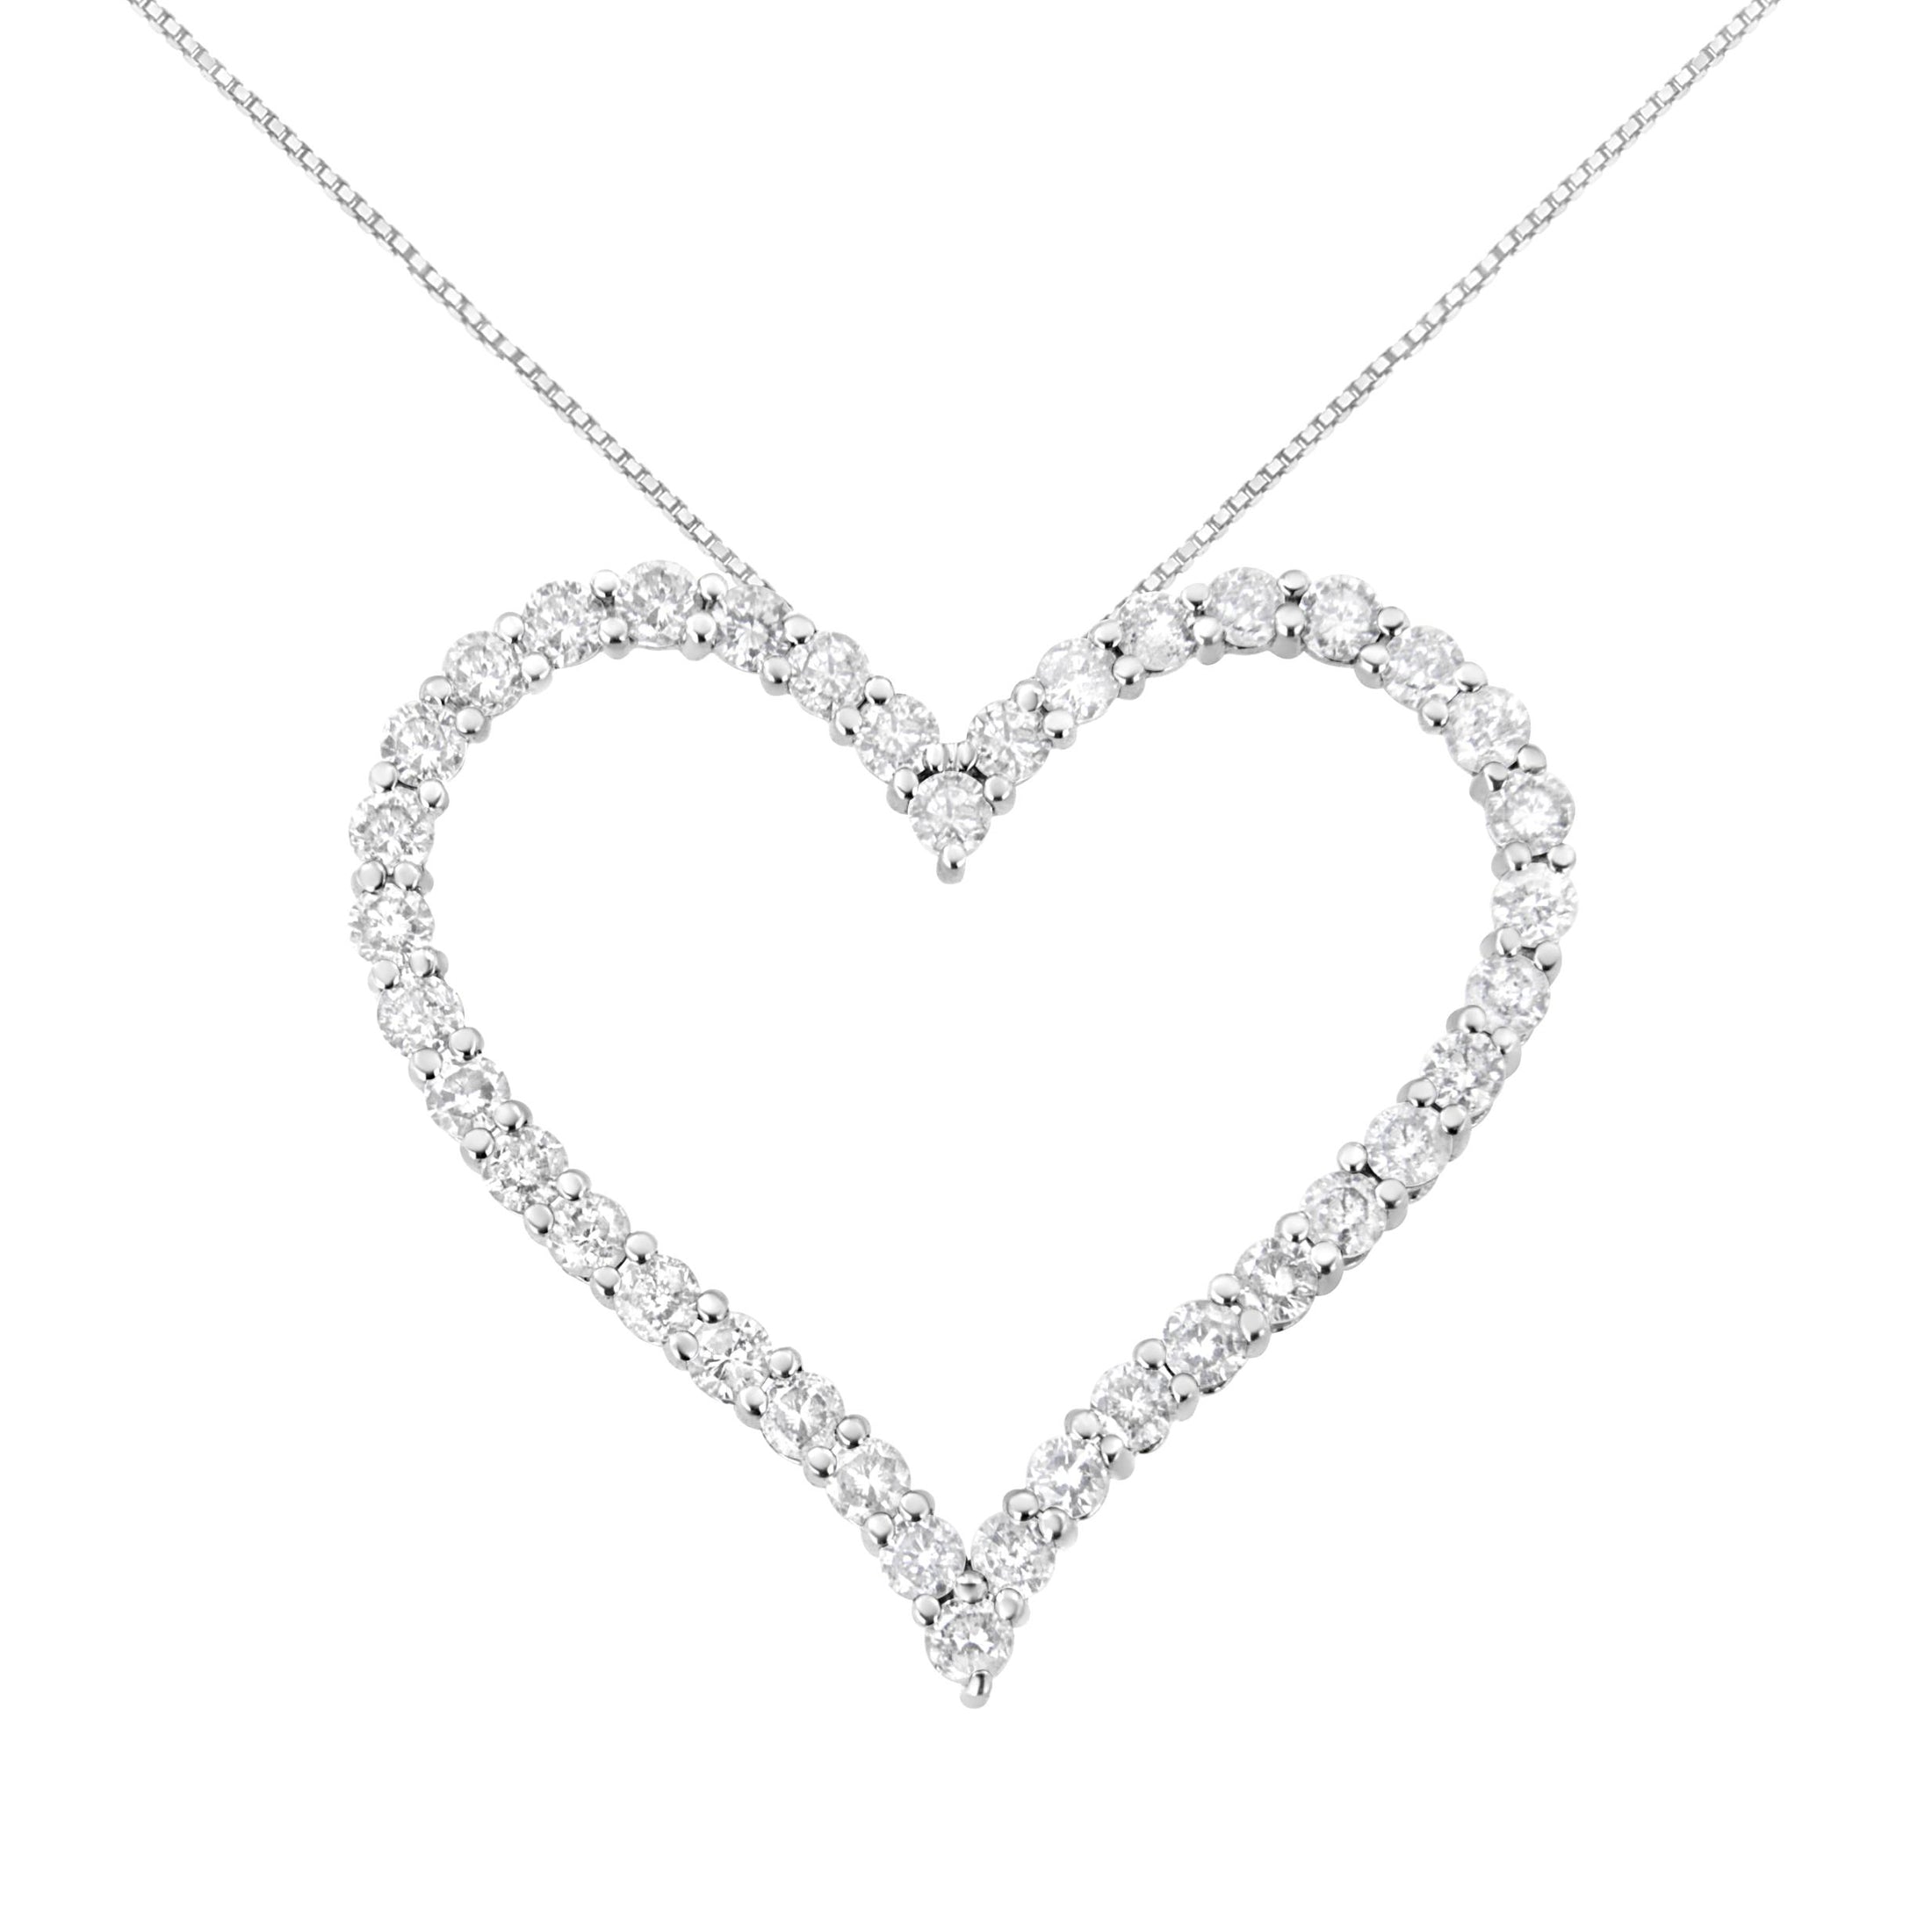 .925 Sterling Silver 3.0 cttw Round-Cut Diamond Open Heart Pendant Necklace - 18"